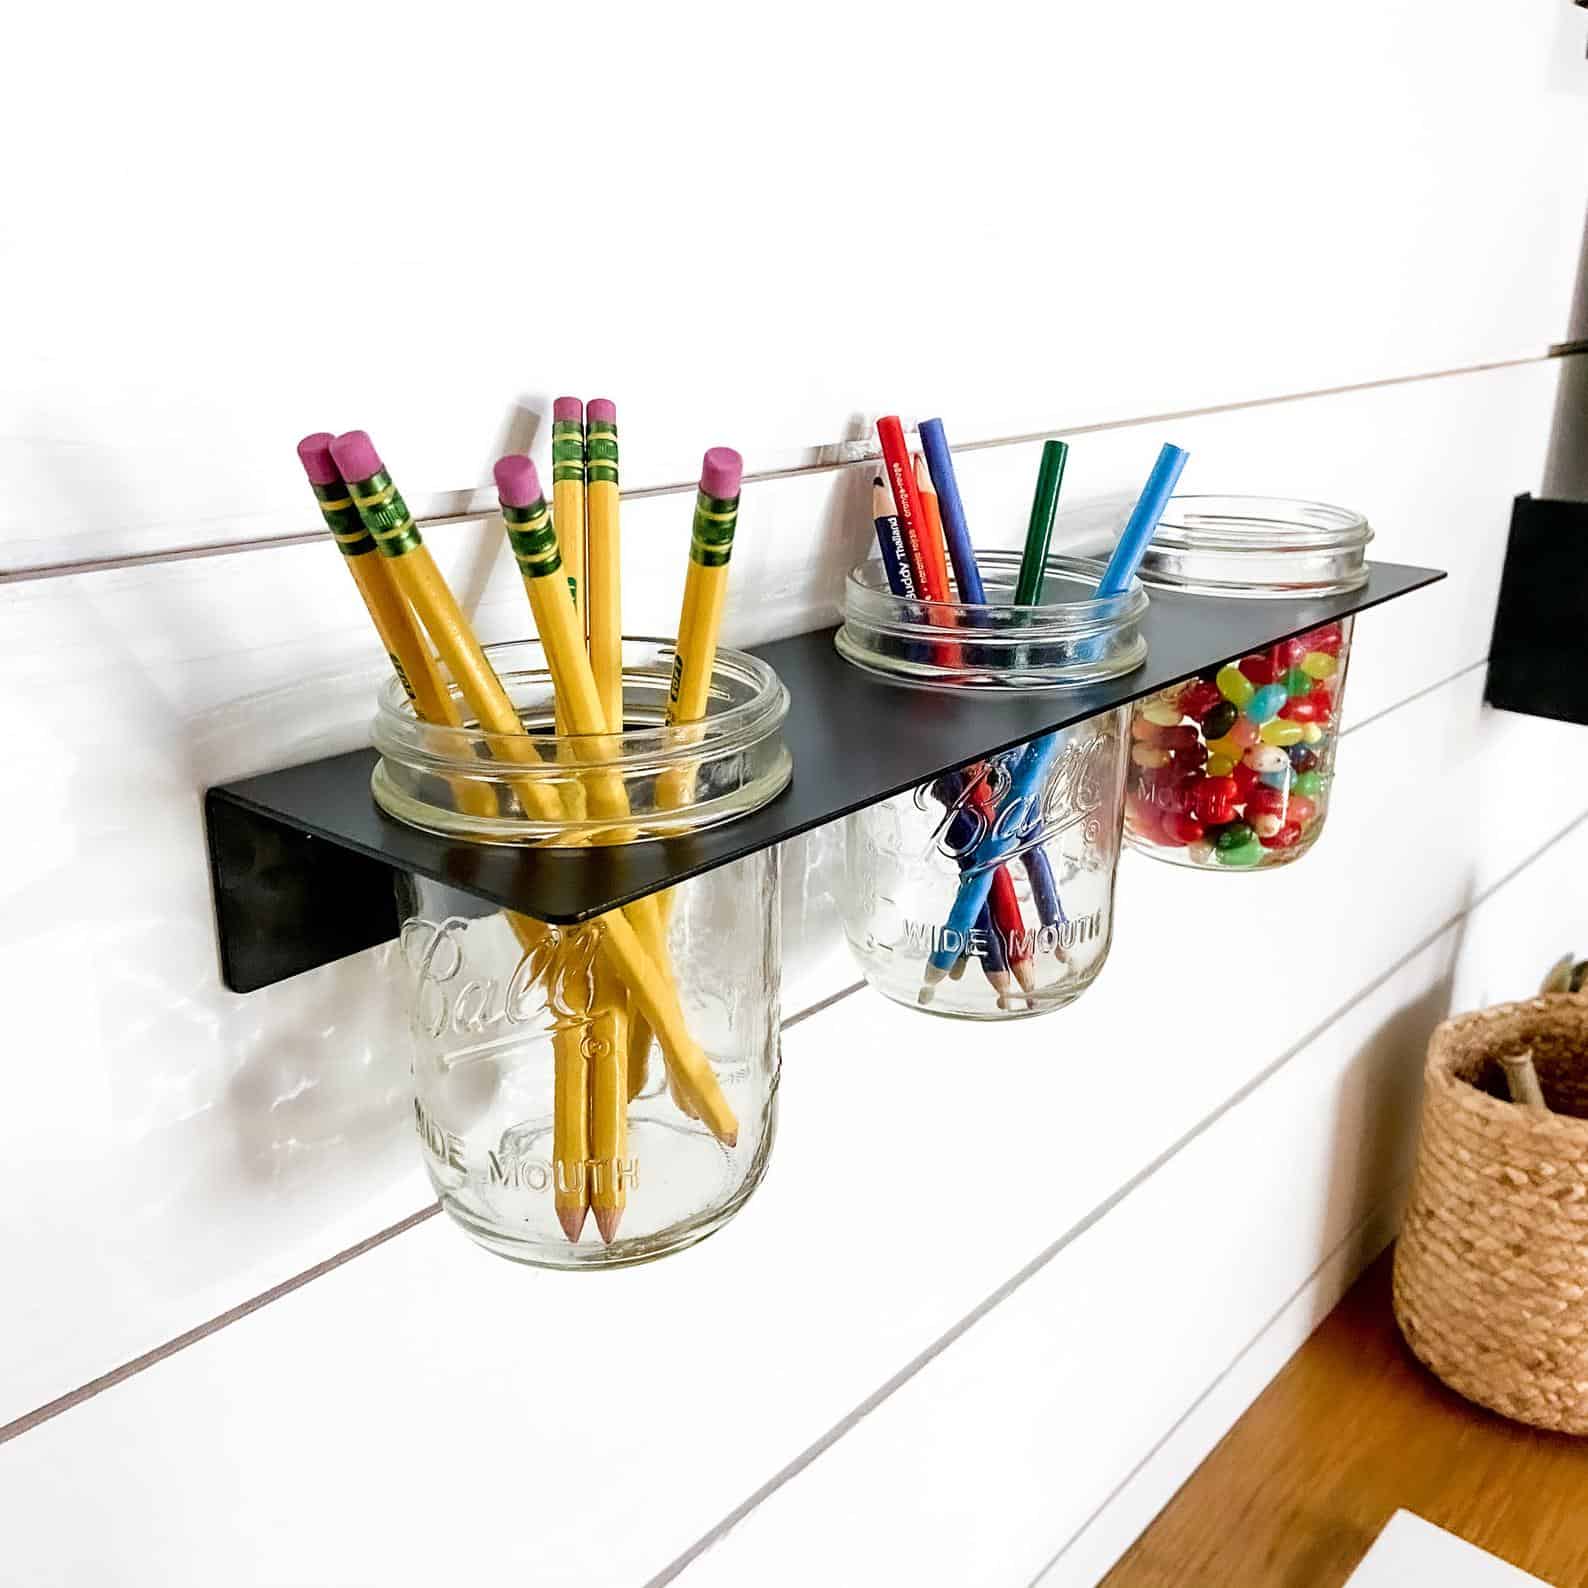 The 7 Best Crayon Storage Ideas For Kids- Where To Store Are Supplies